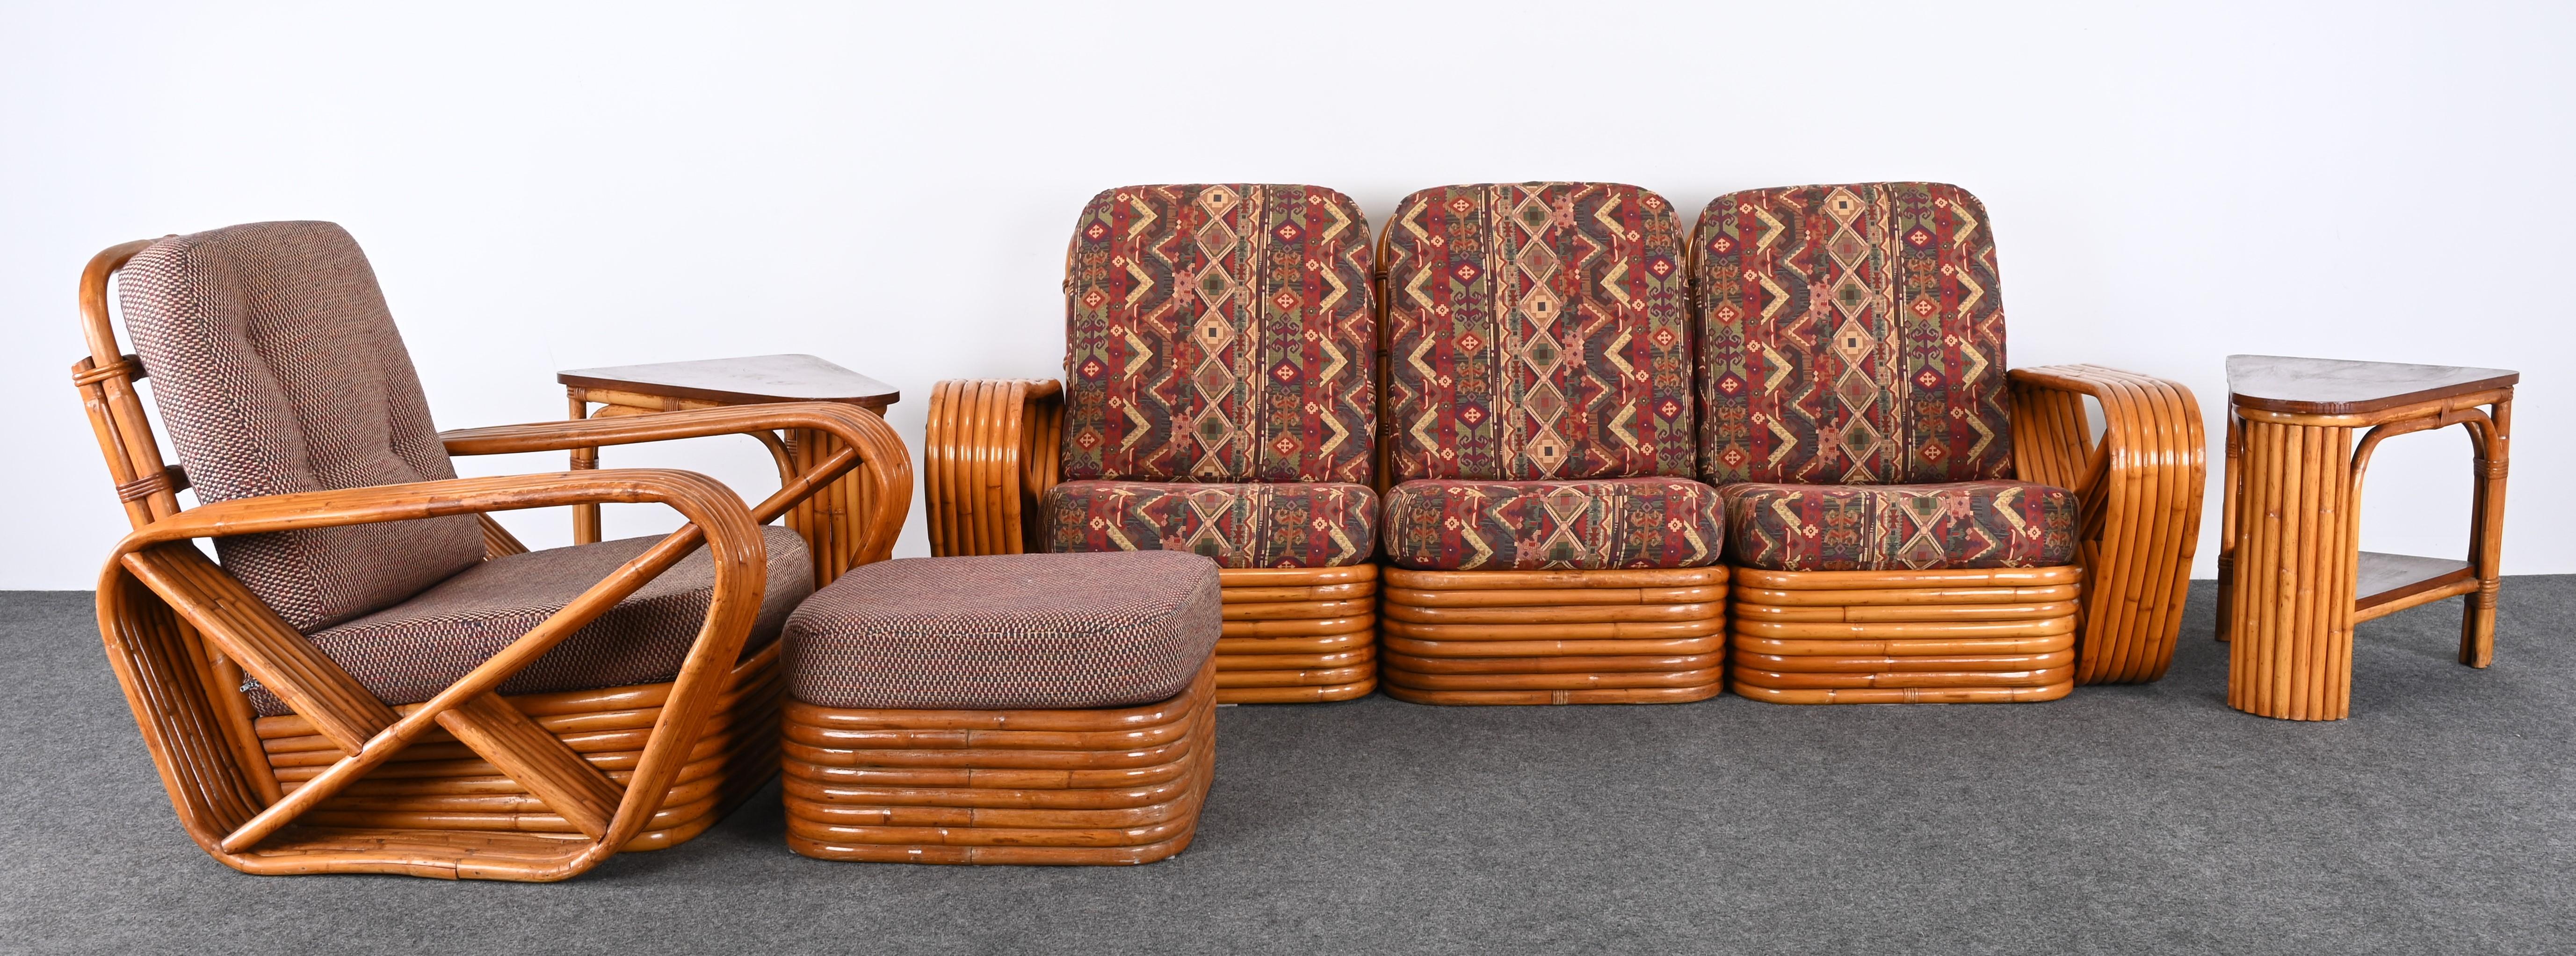 A dynamic Mid-Century Modern set of Paul Frankl style Rattan. This fabulous set would look great in any beach house or second home, whether used in an interior sunroom or covered patio. The set is structurally sound with some wear to finish.